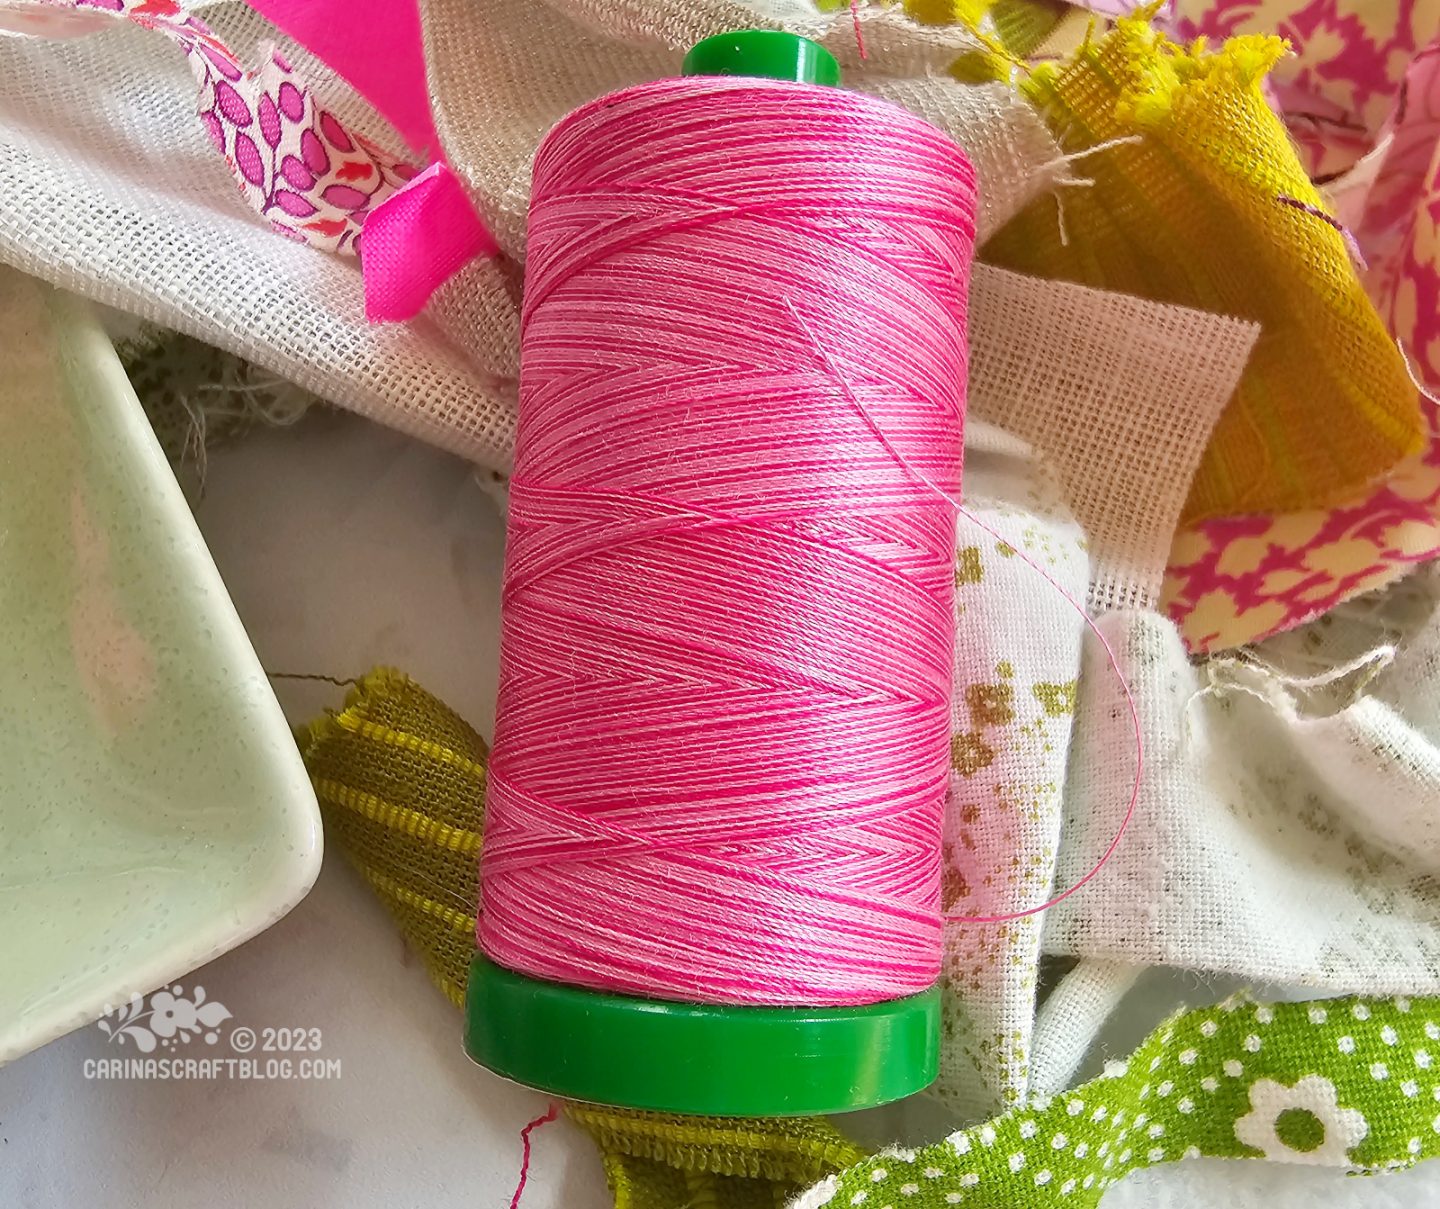 Close view of a spool of thread in a variegated pink colour. The spool itself is green.